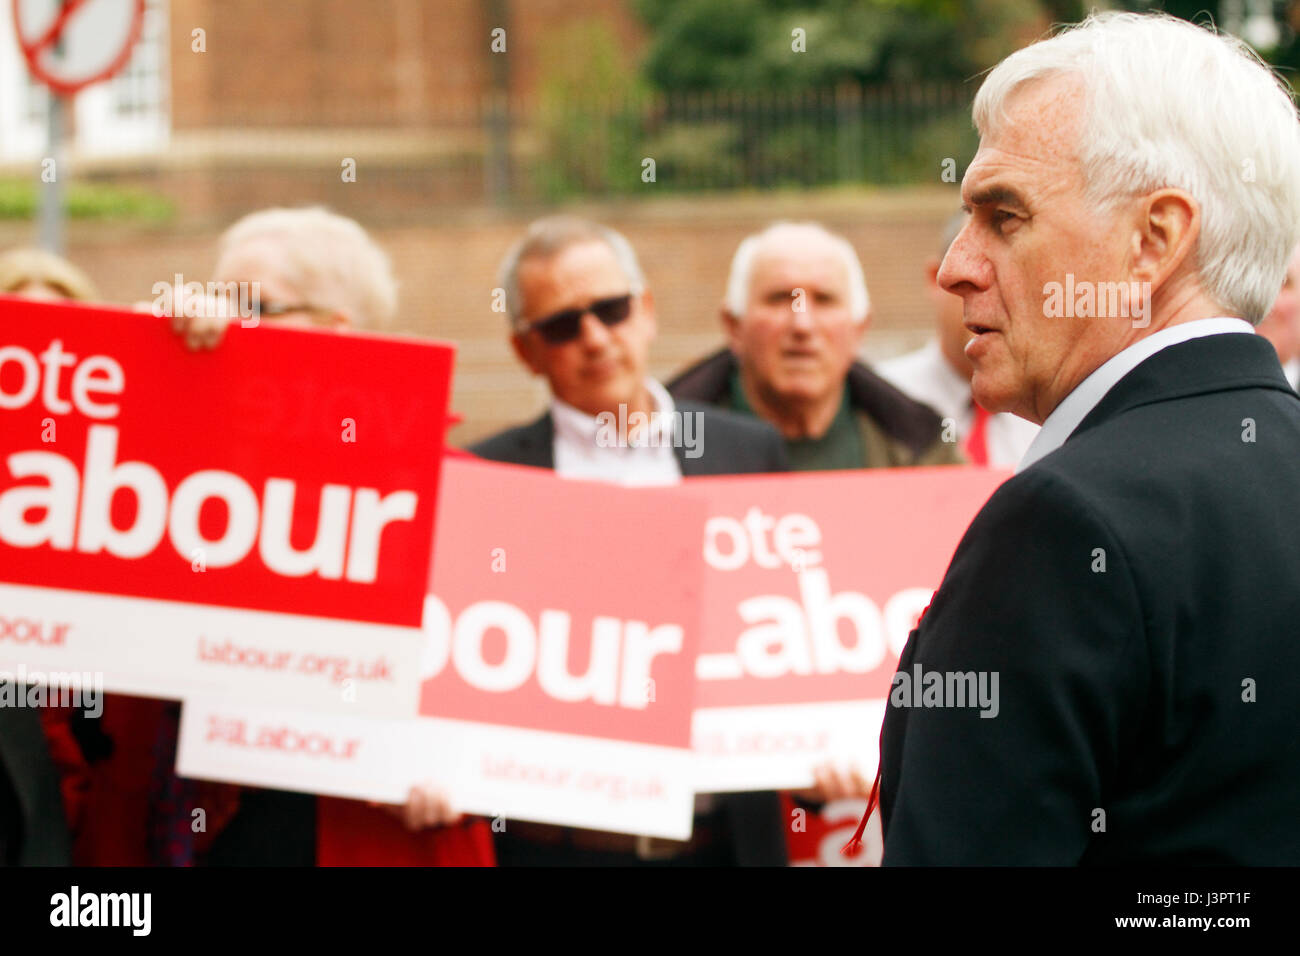 John McDonnell the Labour shadow chancellor visits his MP Colleague Sir Alan Meale MP labour MP for Mansfield. Campaign Rally in West gate Mansfield 2 Stock Photo